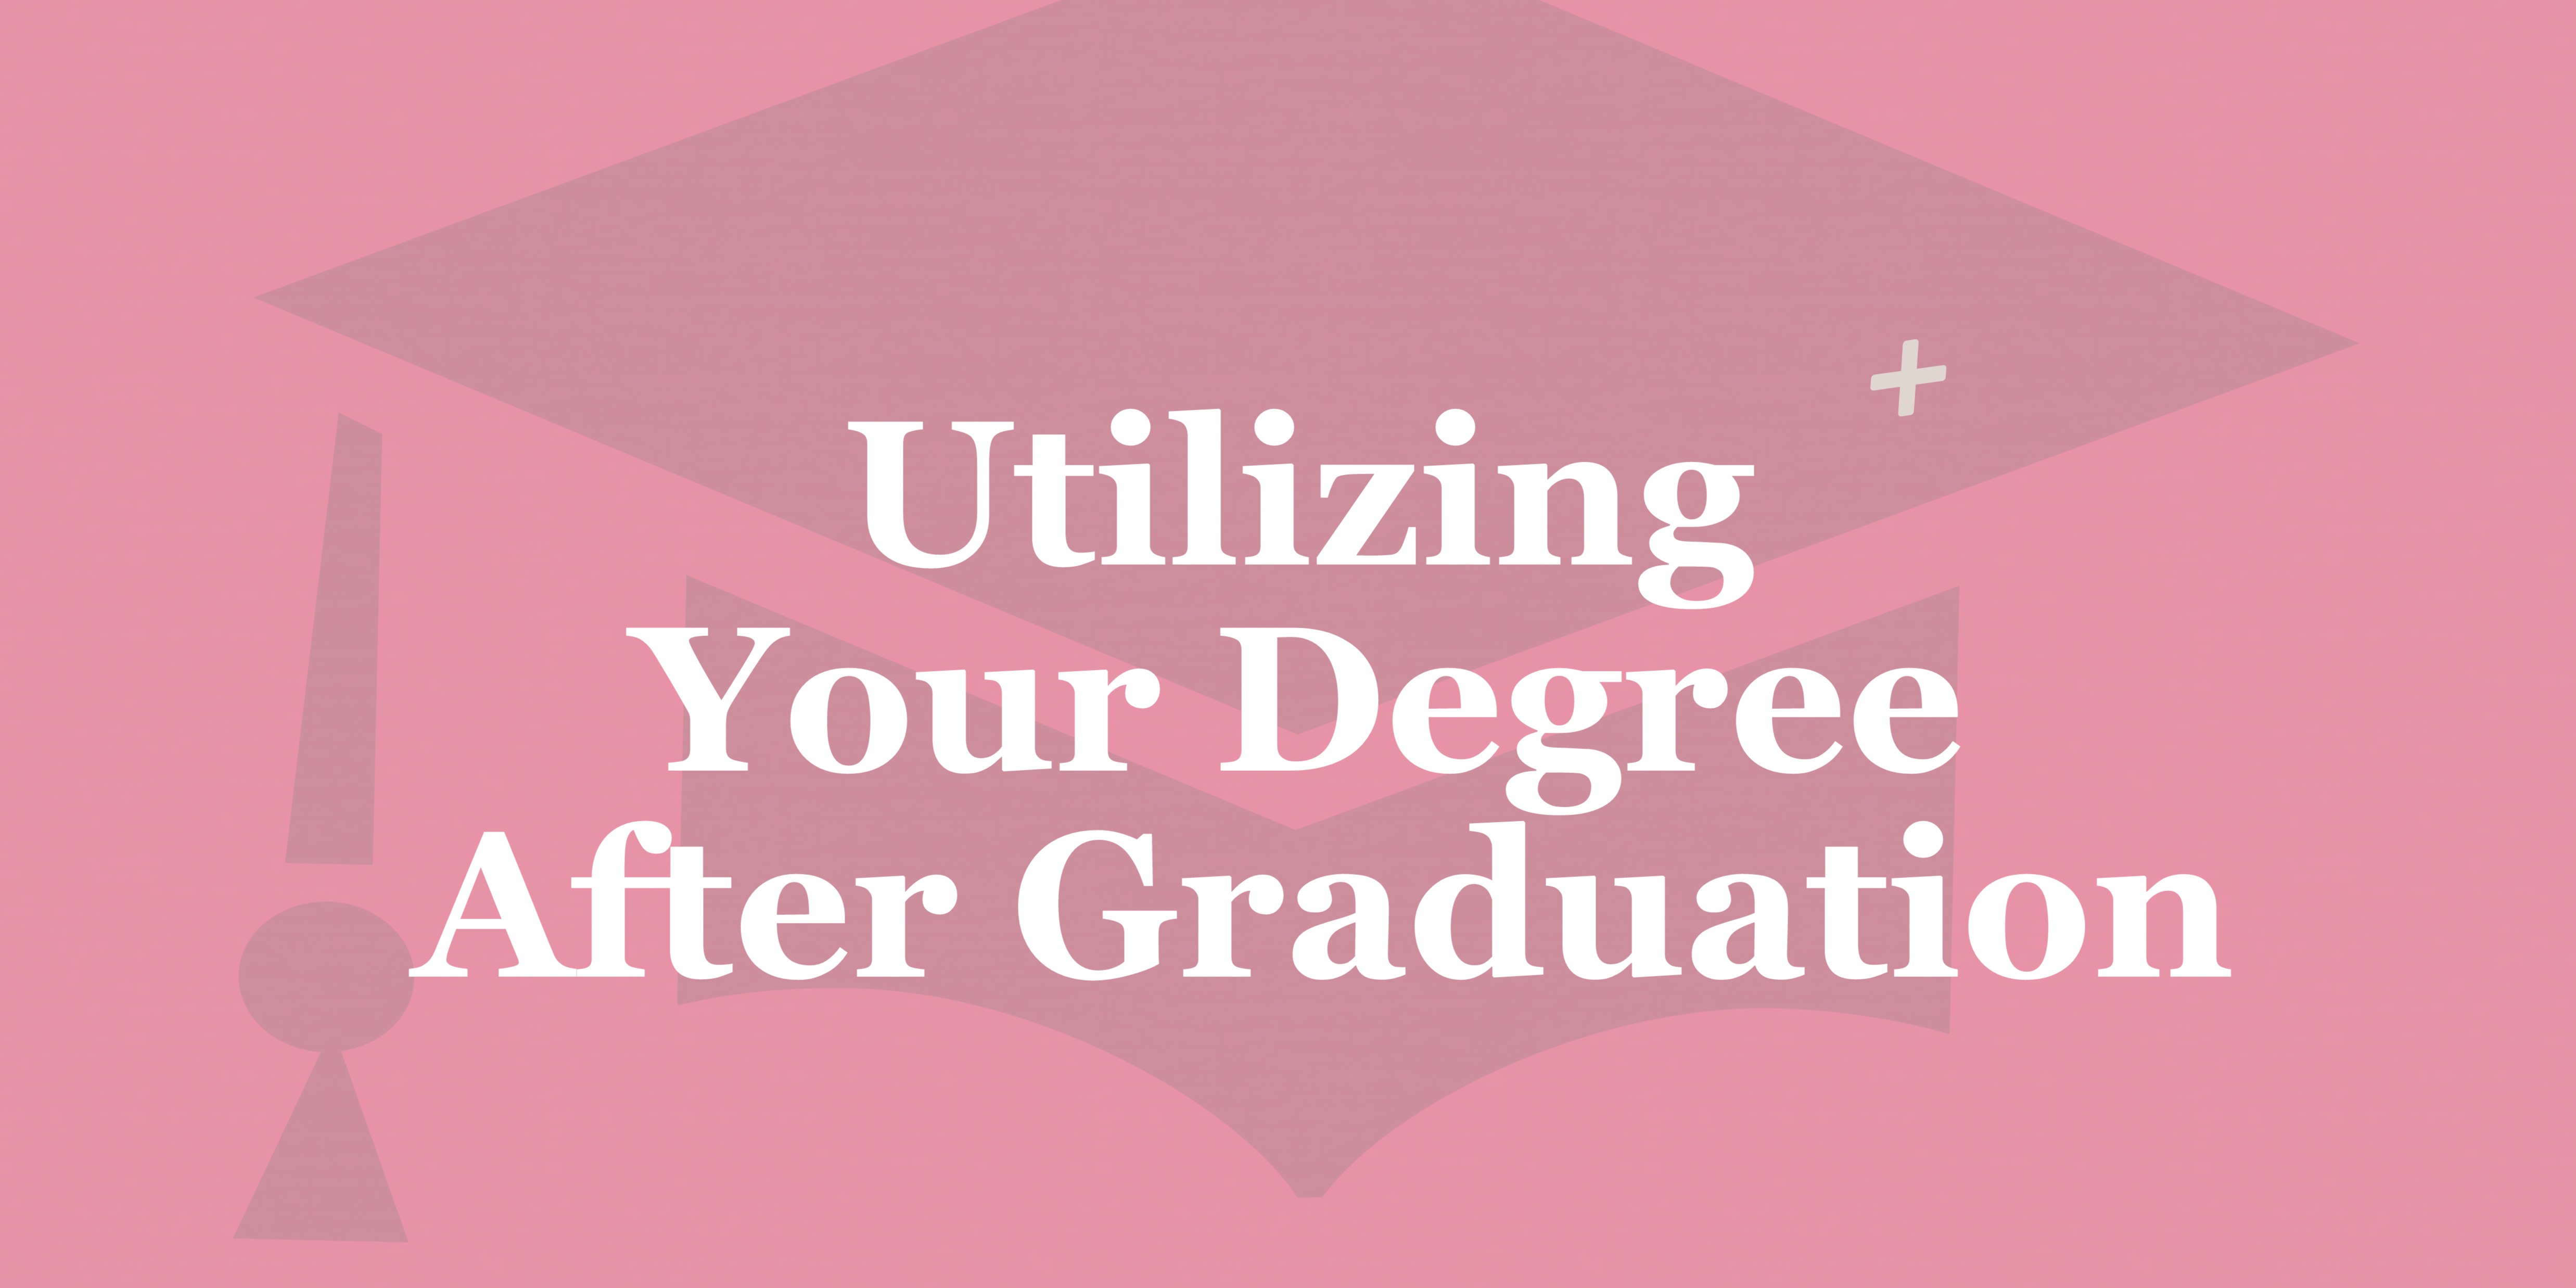 What to do with a degree after graduation